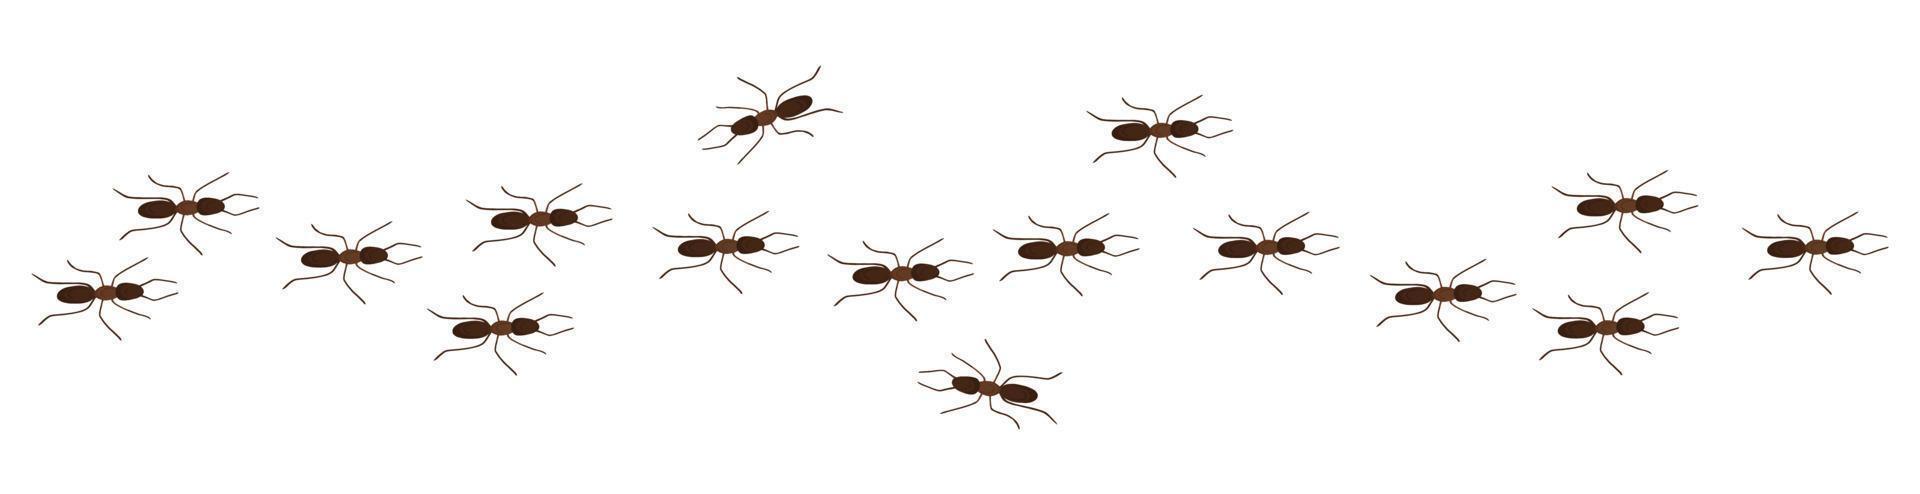 Ant trail line vector